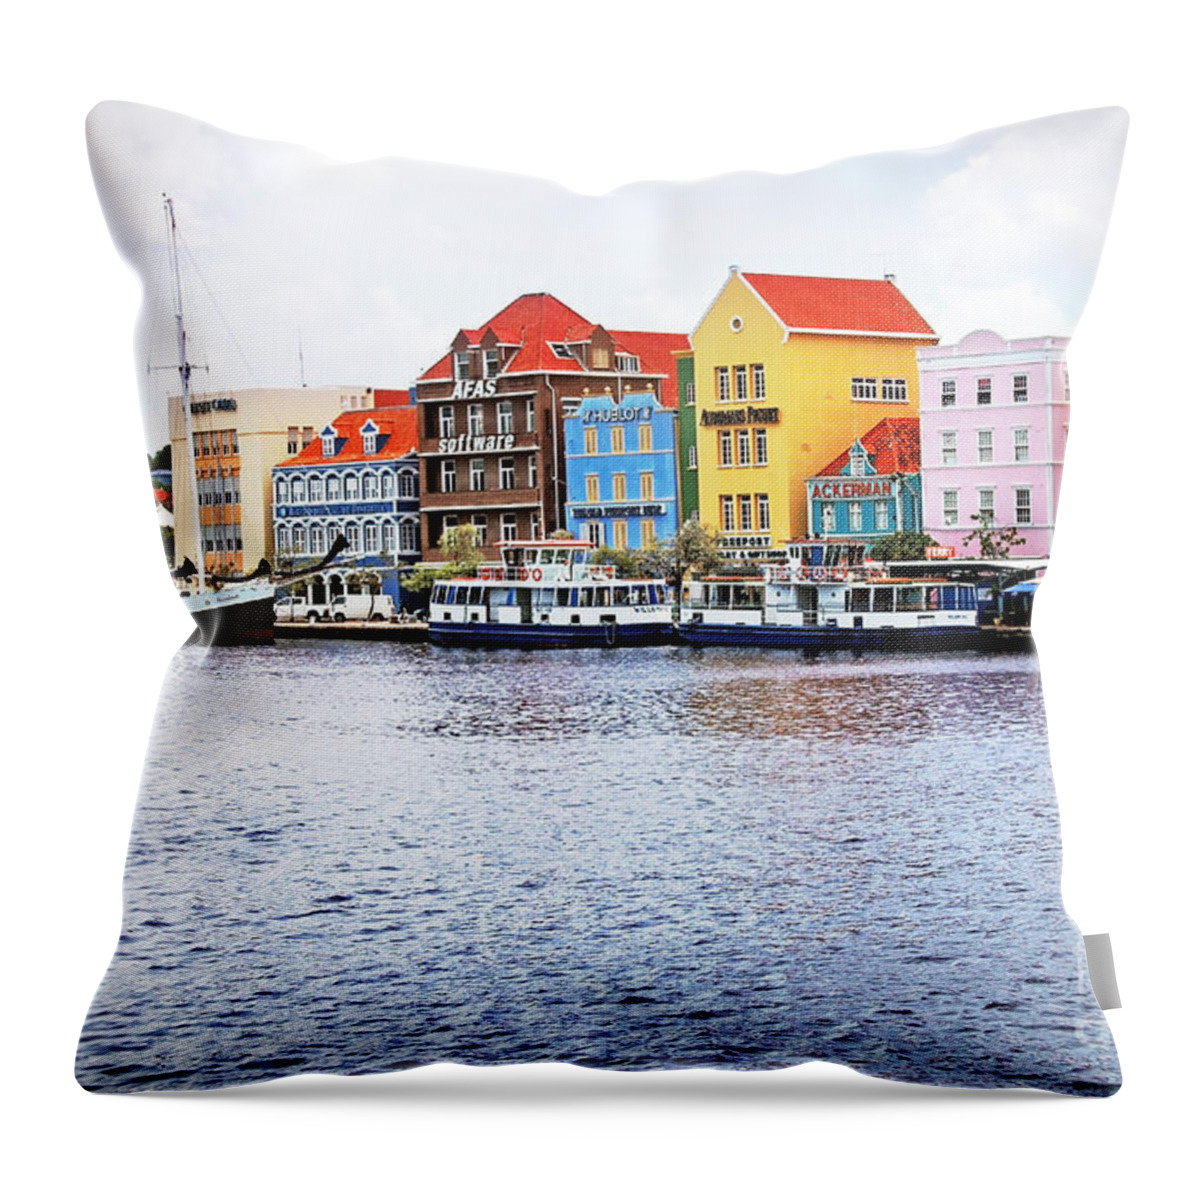 Curacao Throw Pillow featuring the photograph Willemstad Curacao by Jacky Gerritsen